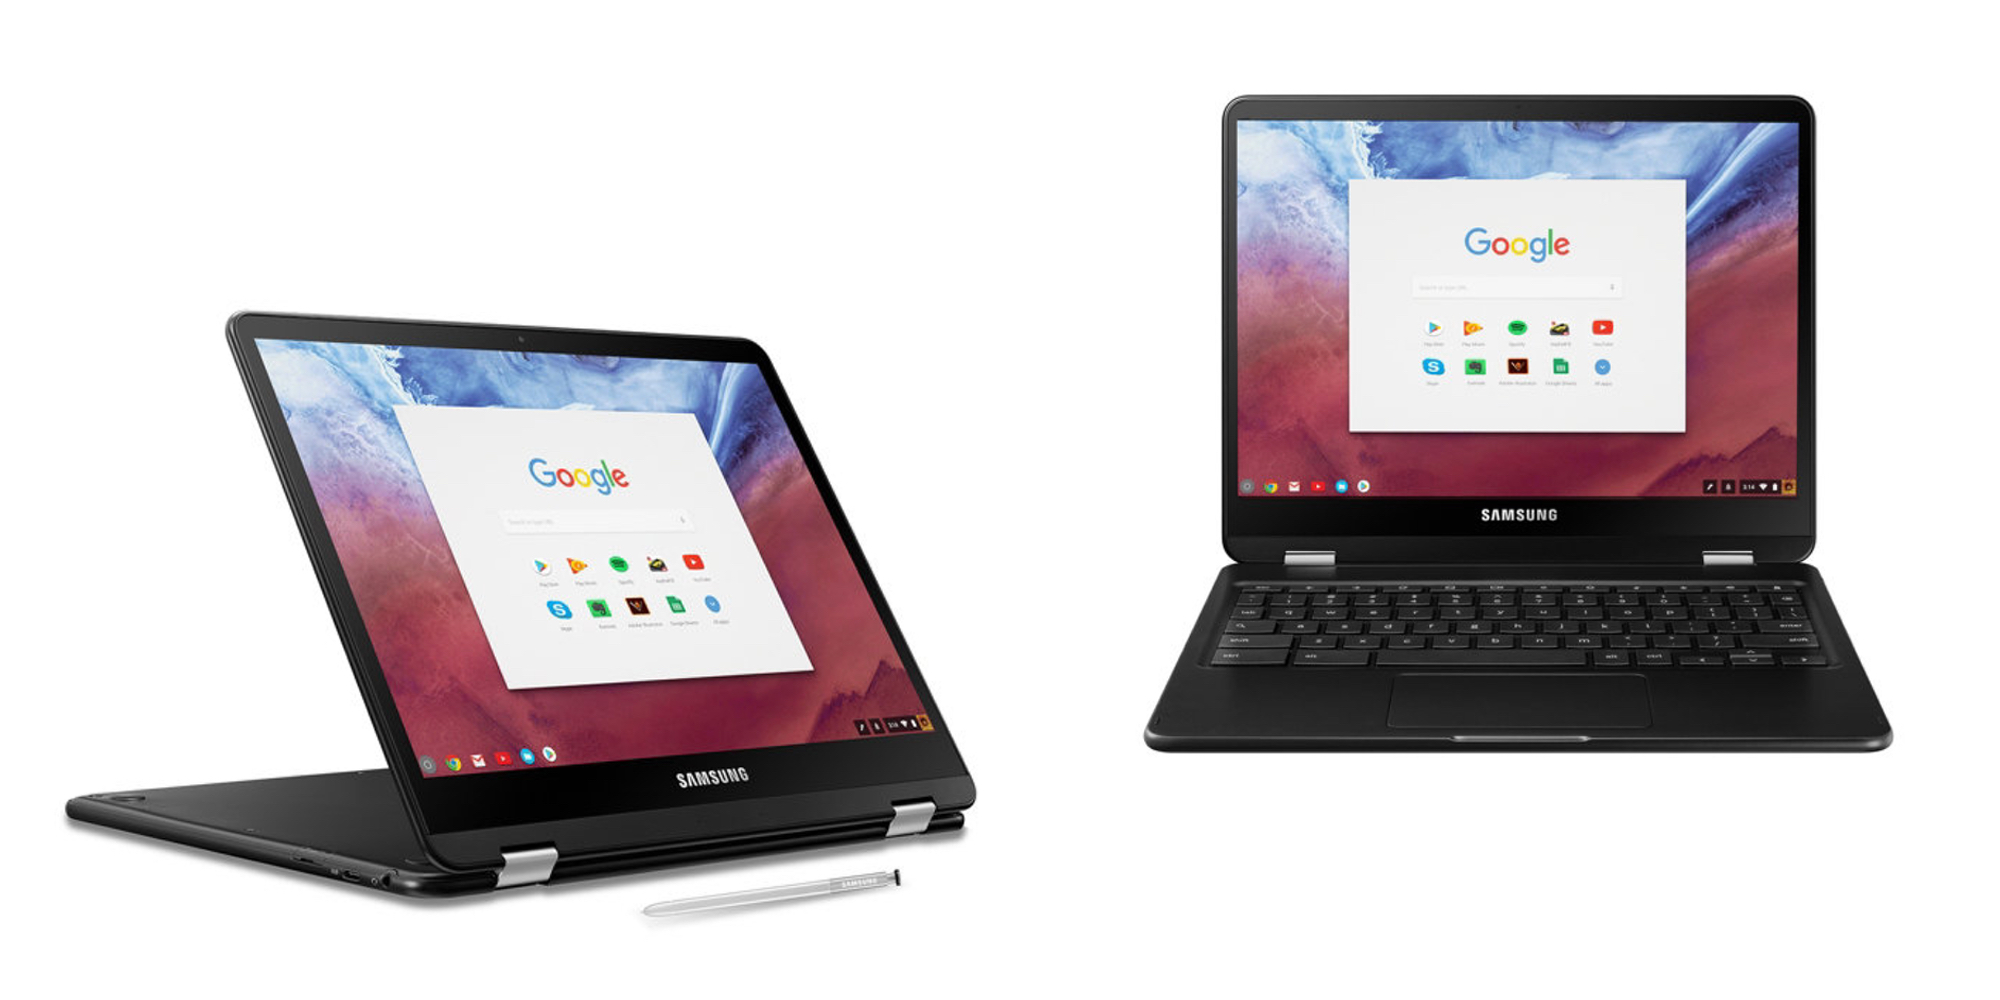 Samsung Pro Touchscreen Chromebook Includes A Free Google Home Mini For 449 Or 382 Open Box 9to5toys